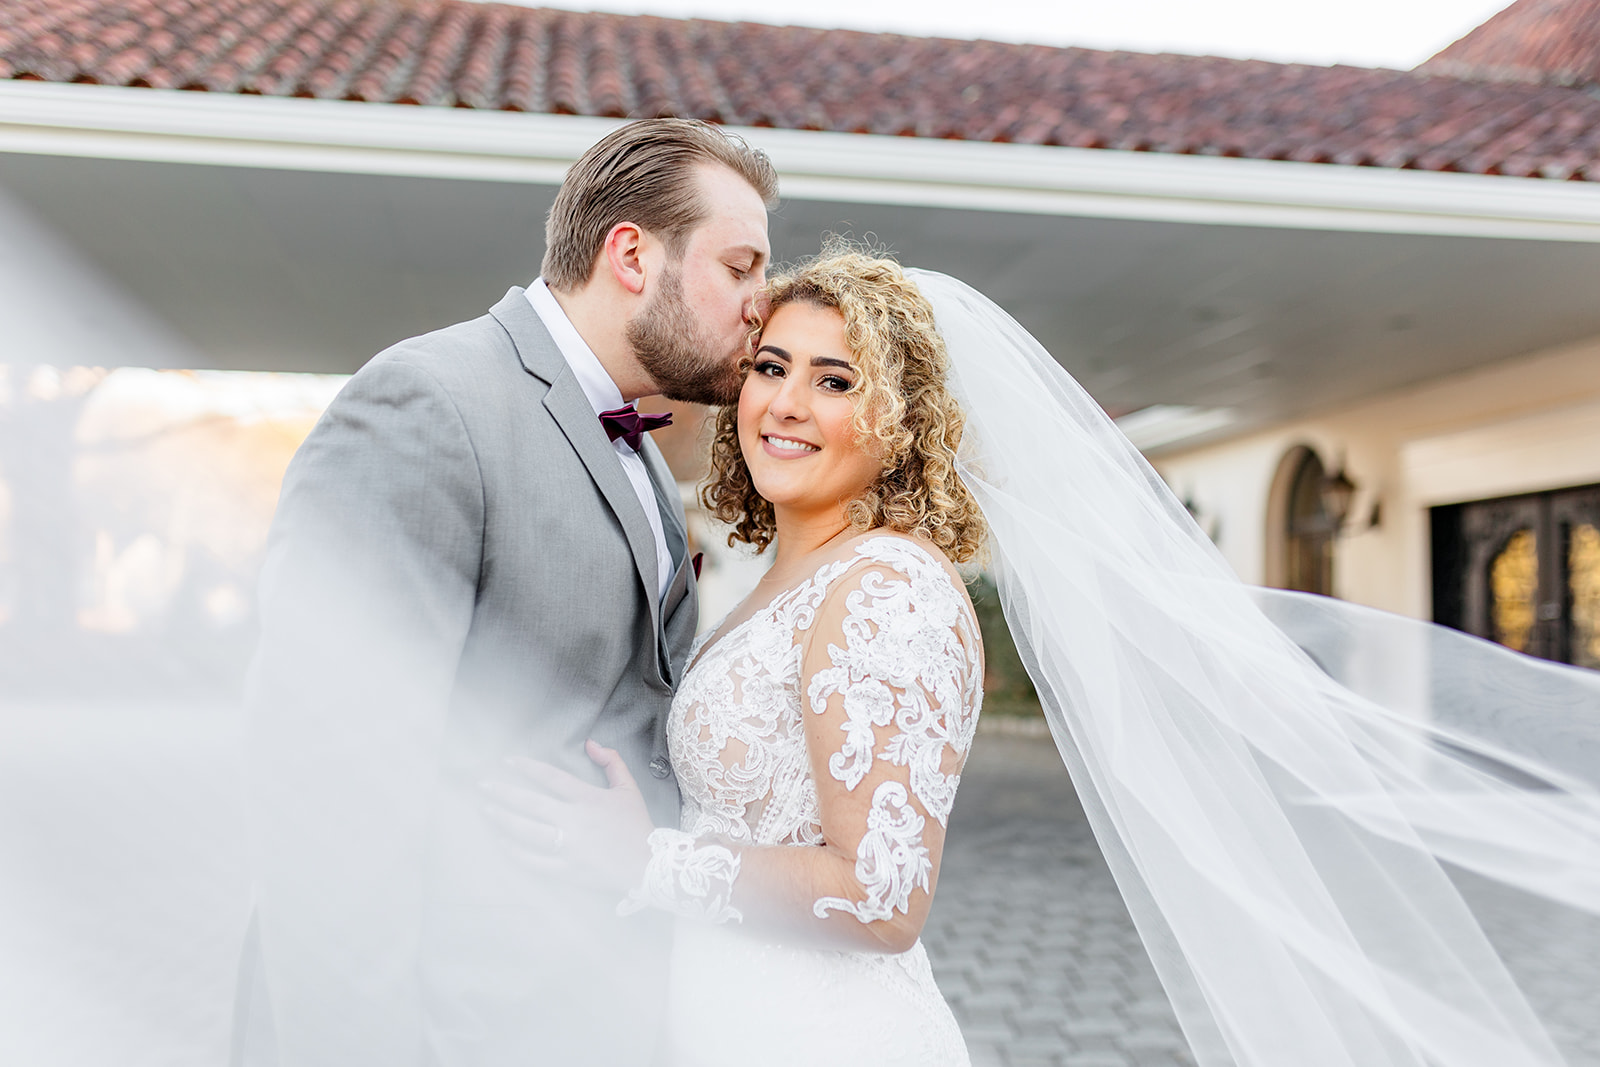 A groom in a grey suit kisses the head of his bride in a lace embroidered dress as the veil flows around them